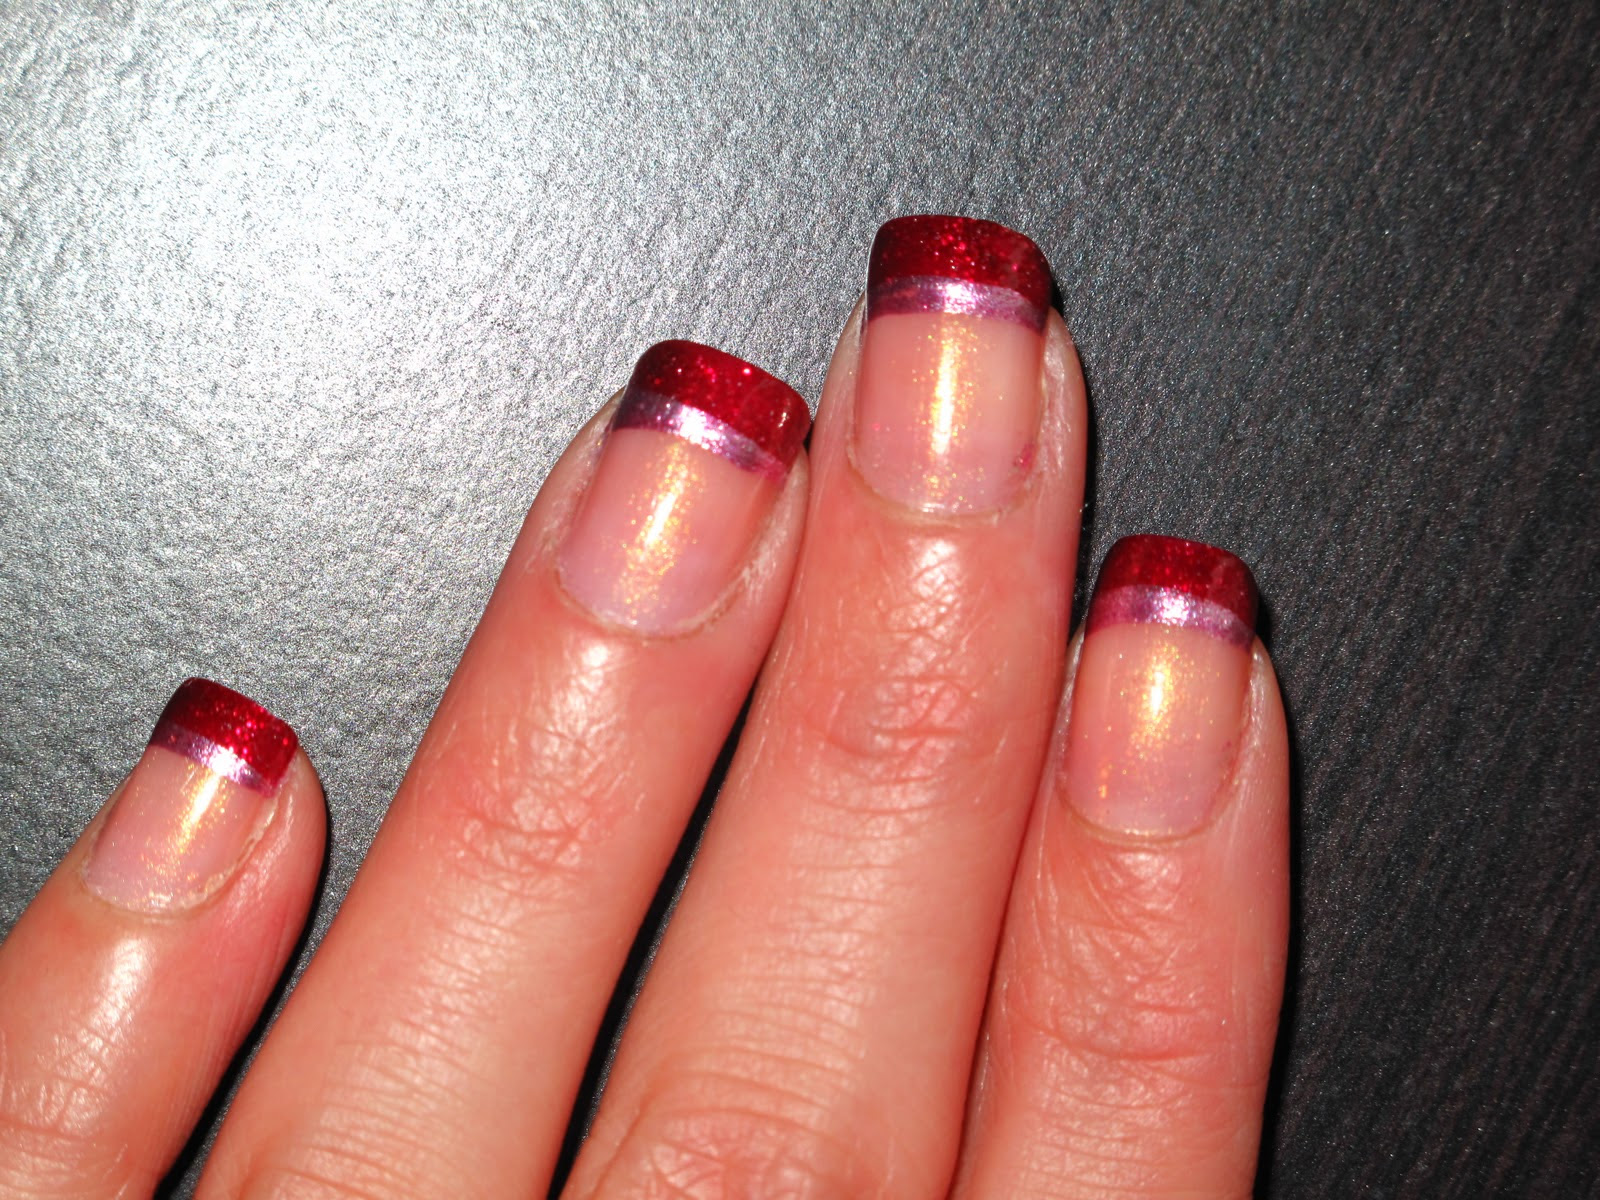 5. "Cherry Red French Tip Nails" - wide 4